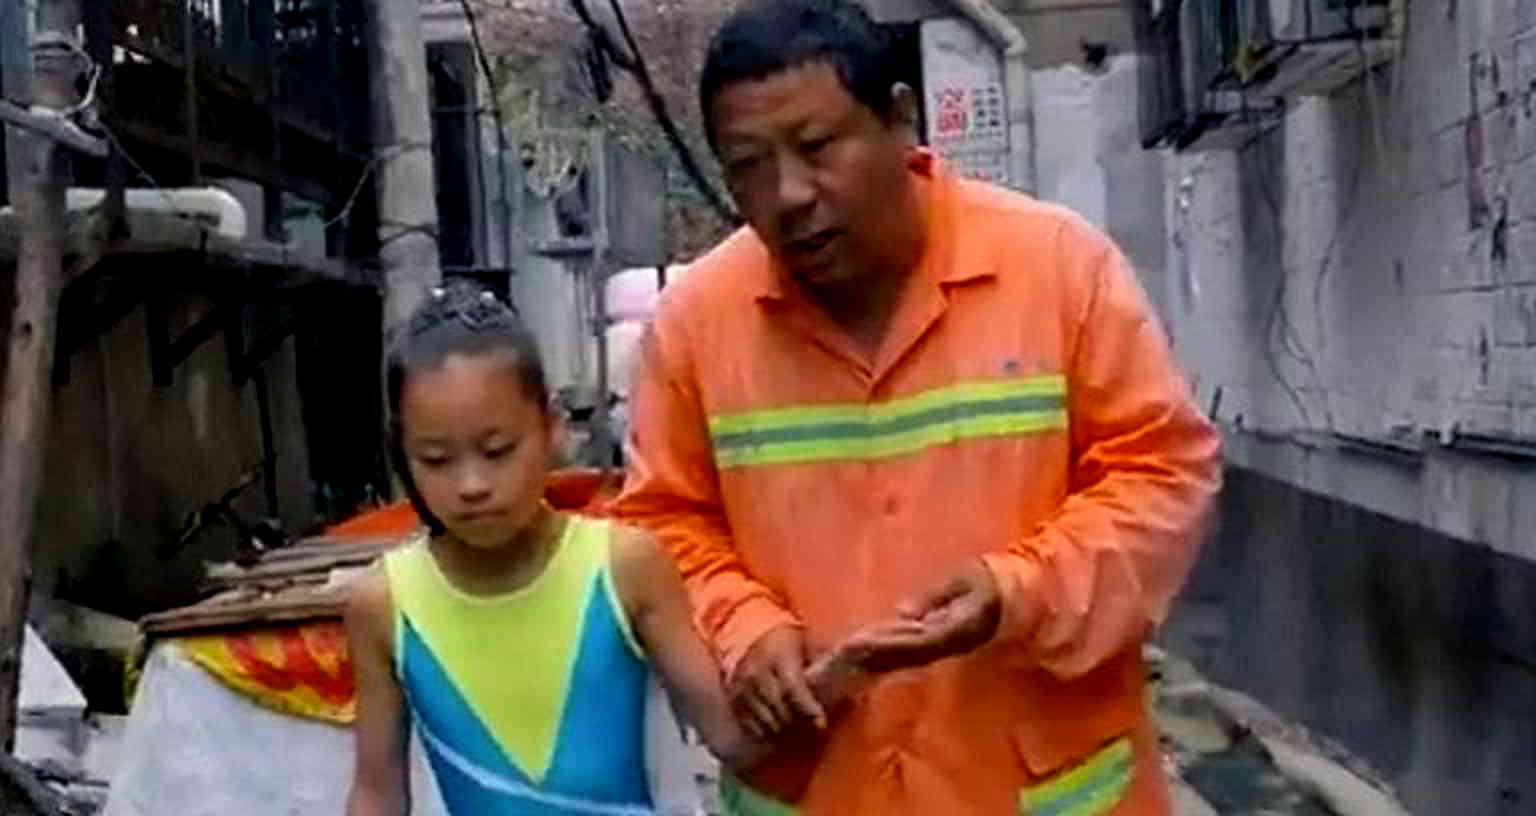 Street Cleaner Only Eats Noodles to Support His Daughter’s Dream of Becoming a Gymnast